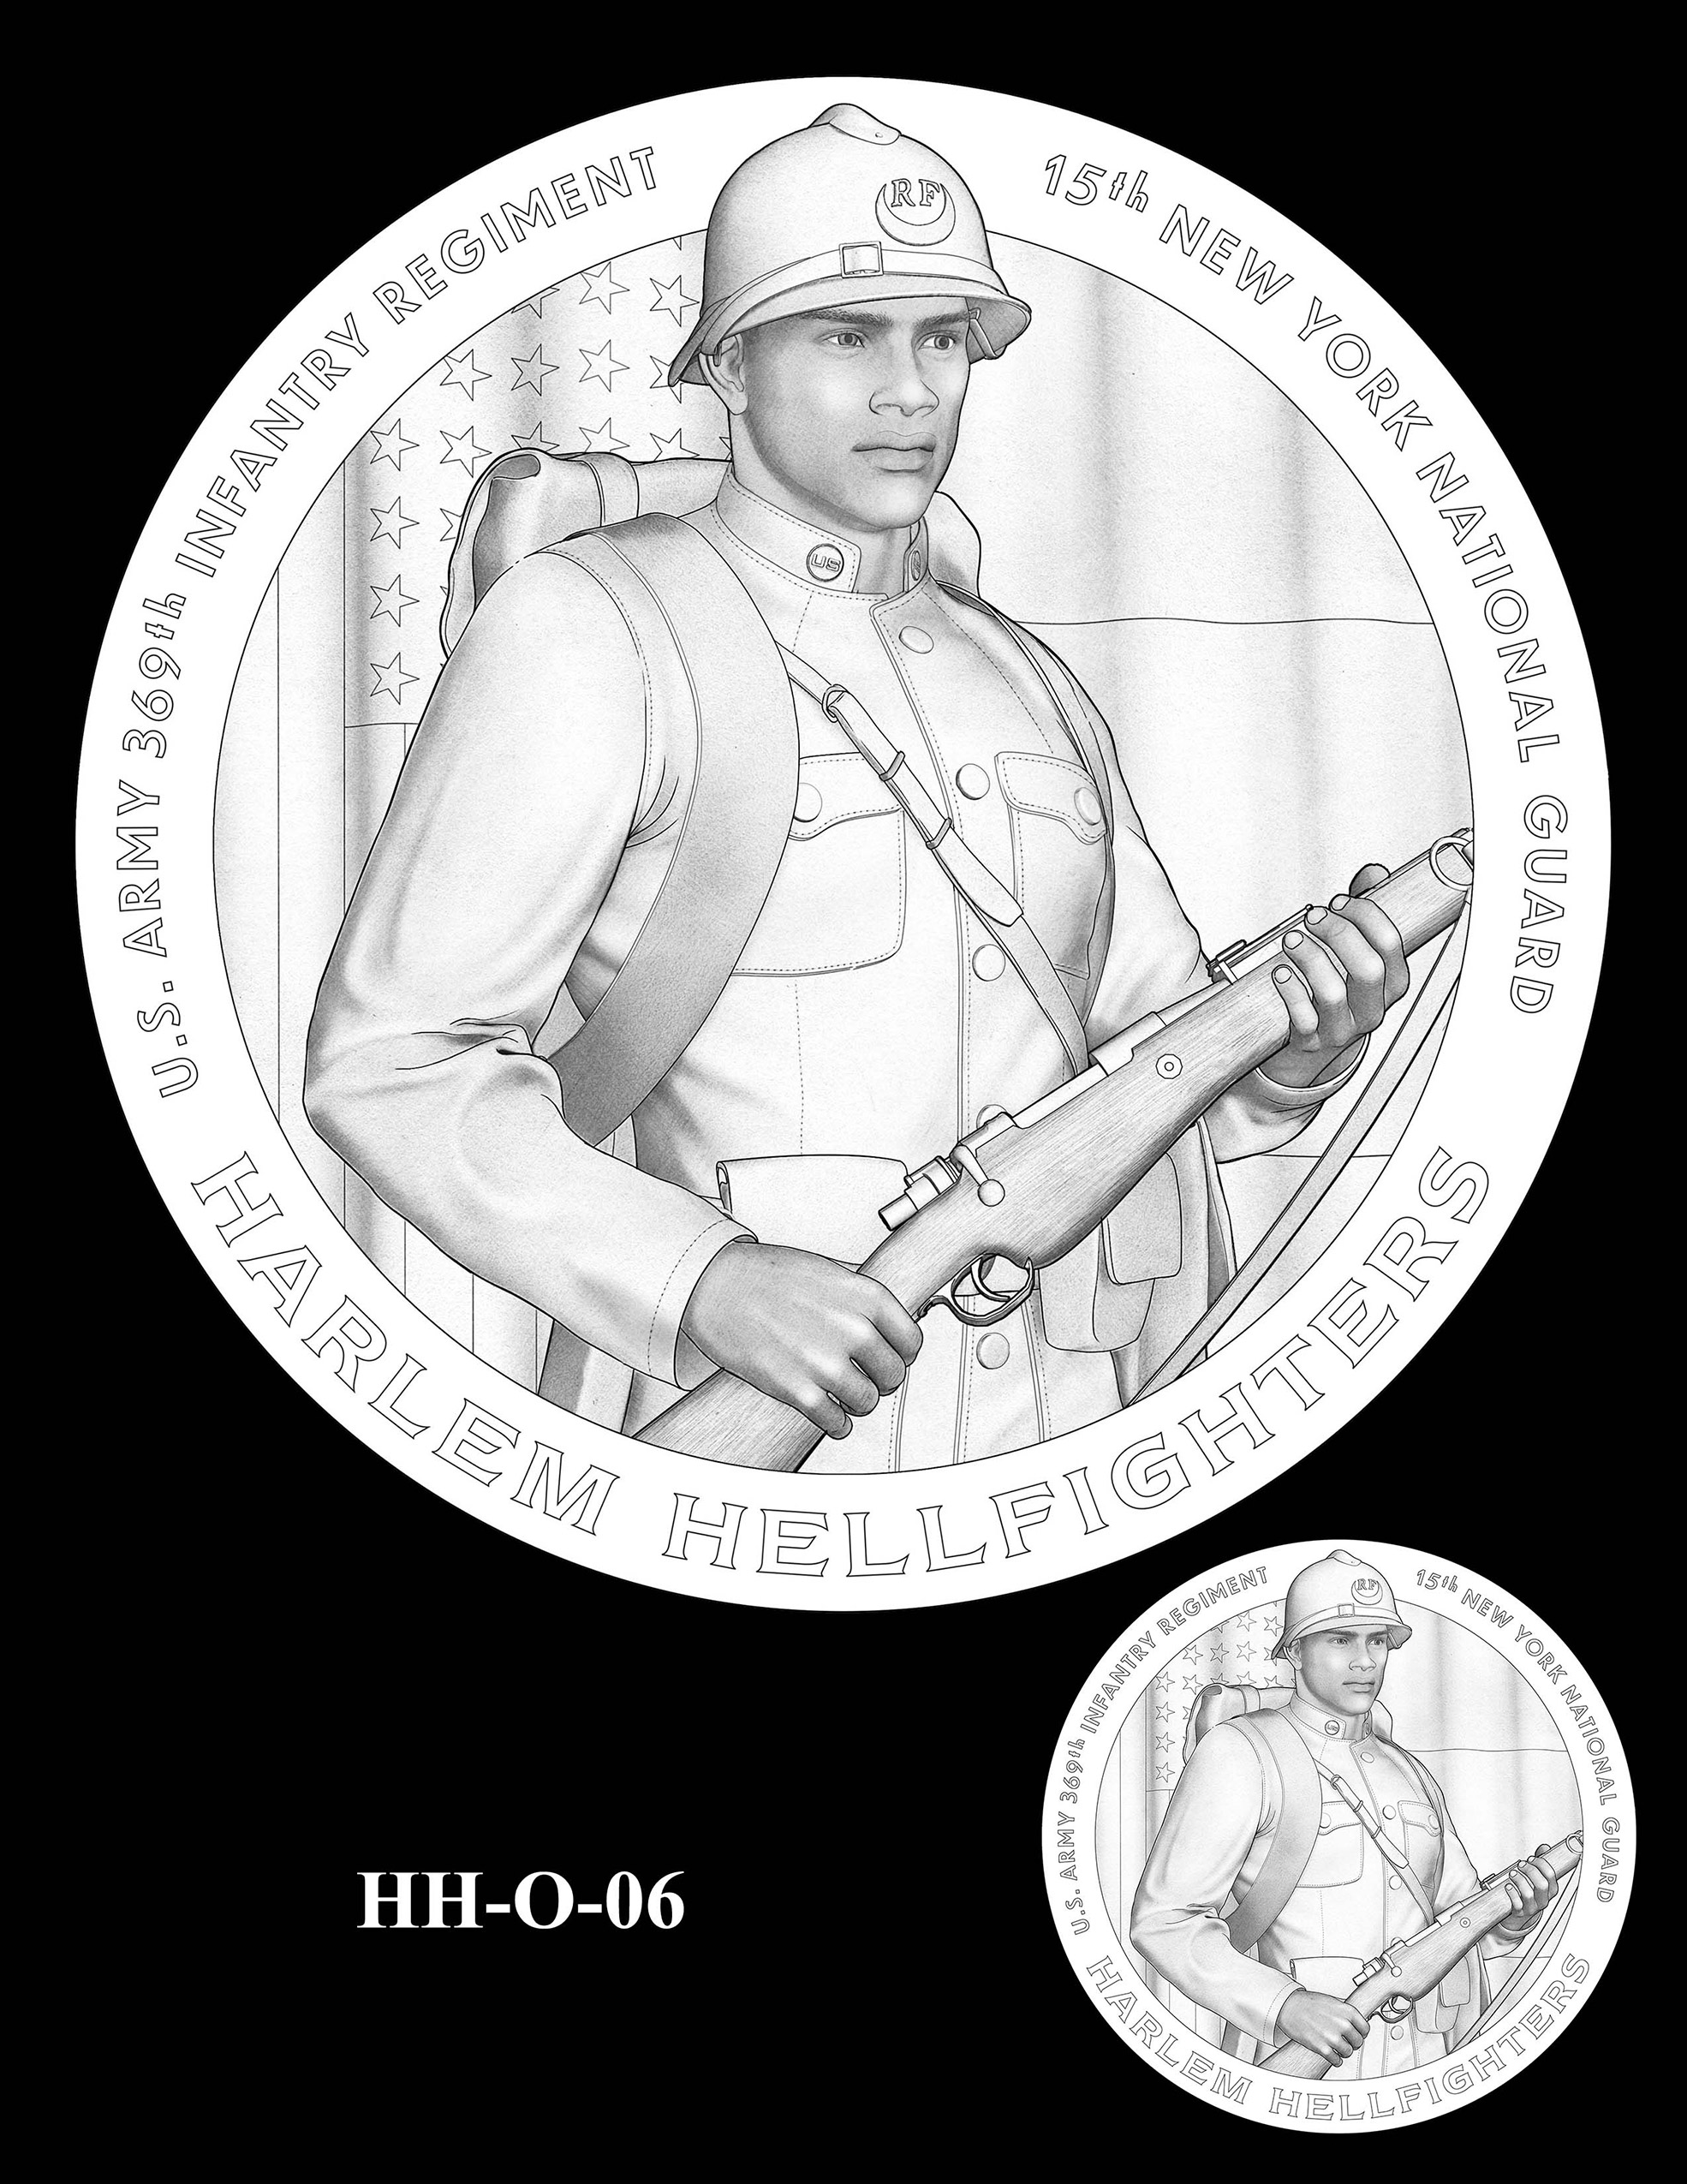 HH-O-06 -- Harlem Hellfighters Congressional Gold Medal